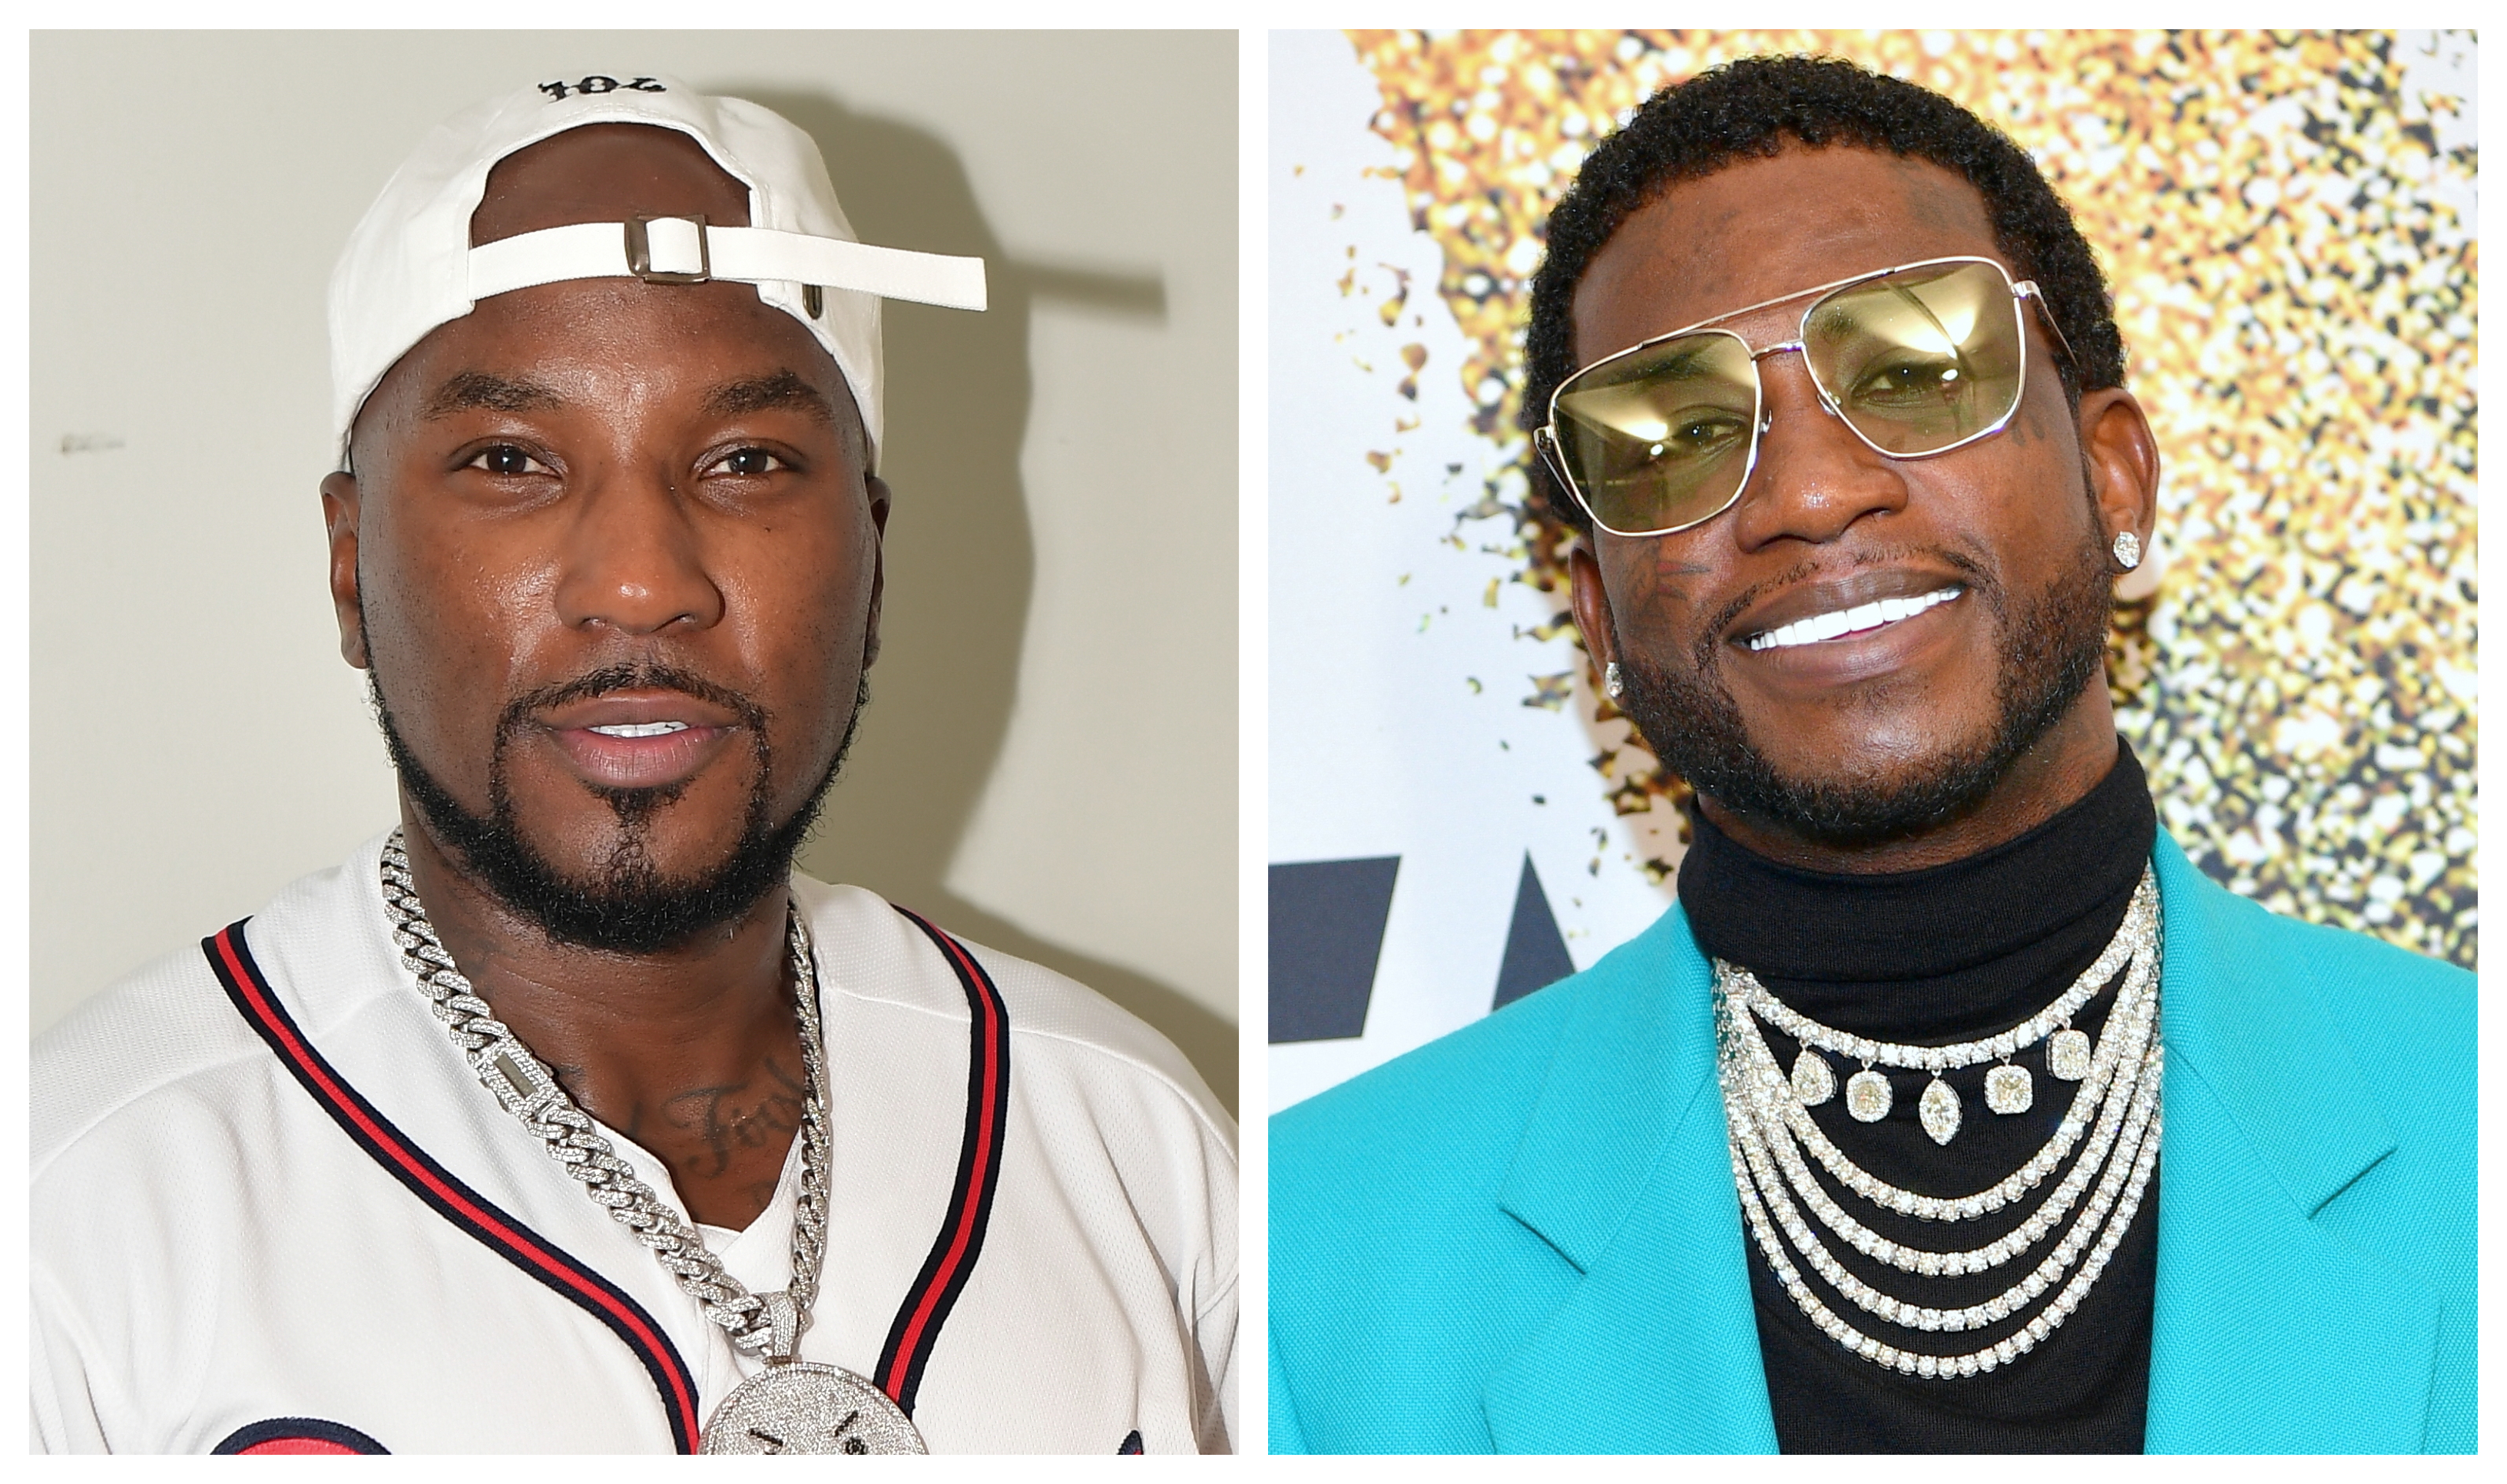 Funniest (And Messiest) Reactions To Gucci Mane & Jeezy's Verzuz Battle